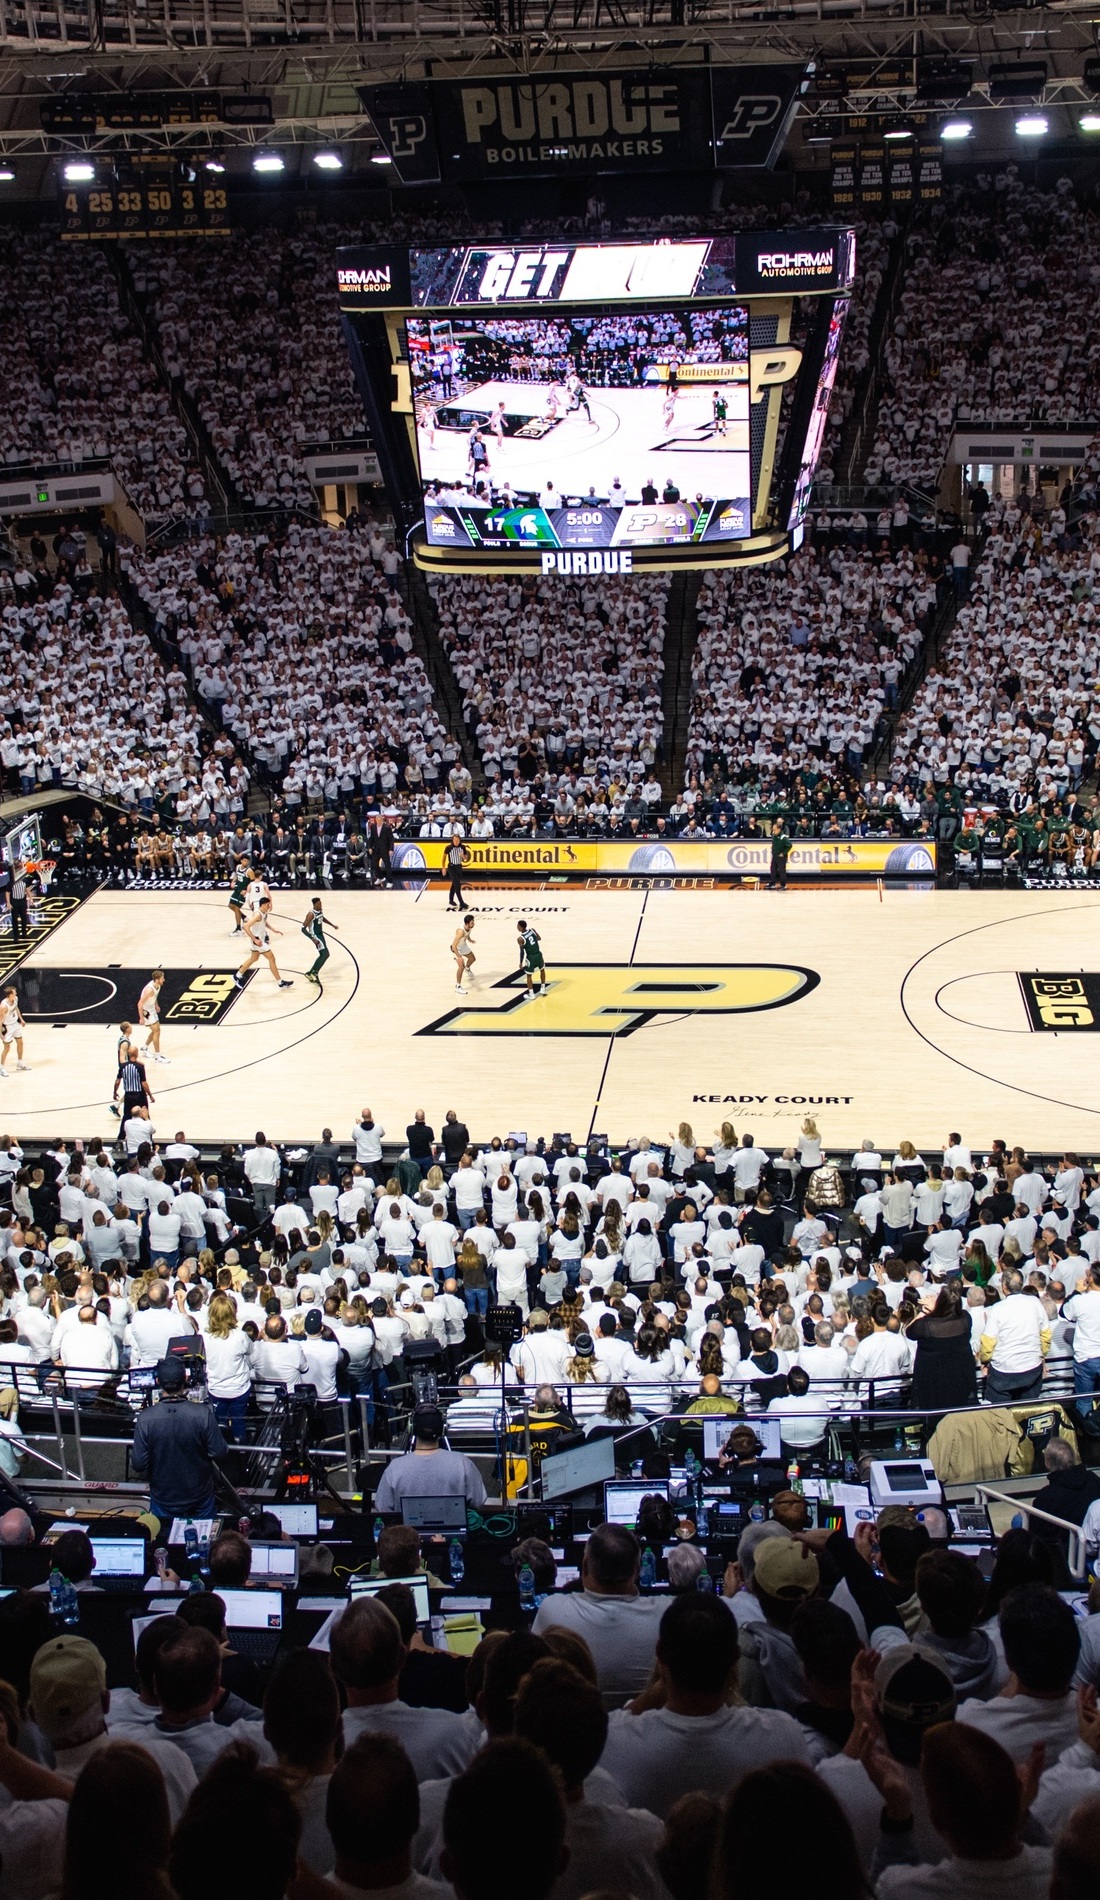 A Purdue Boilermakers Basketball live event